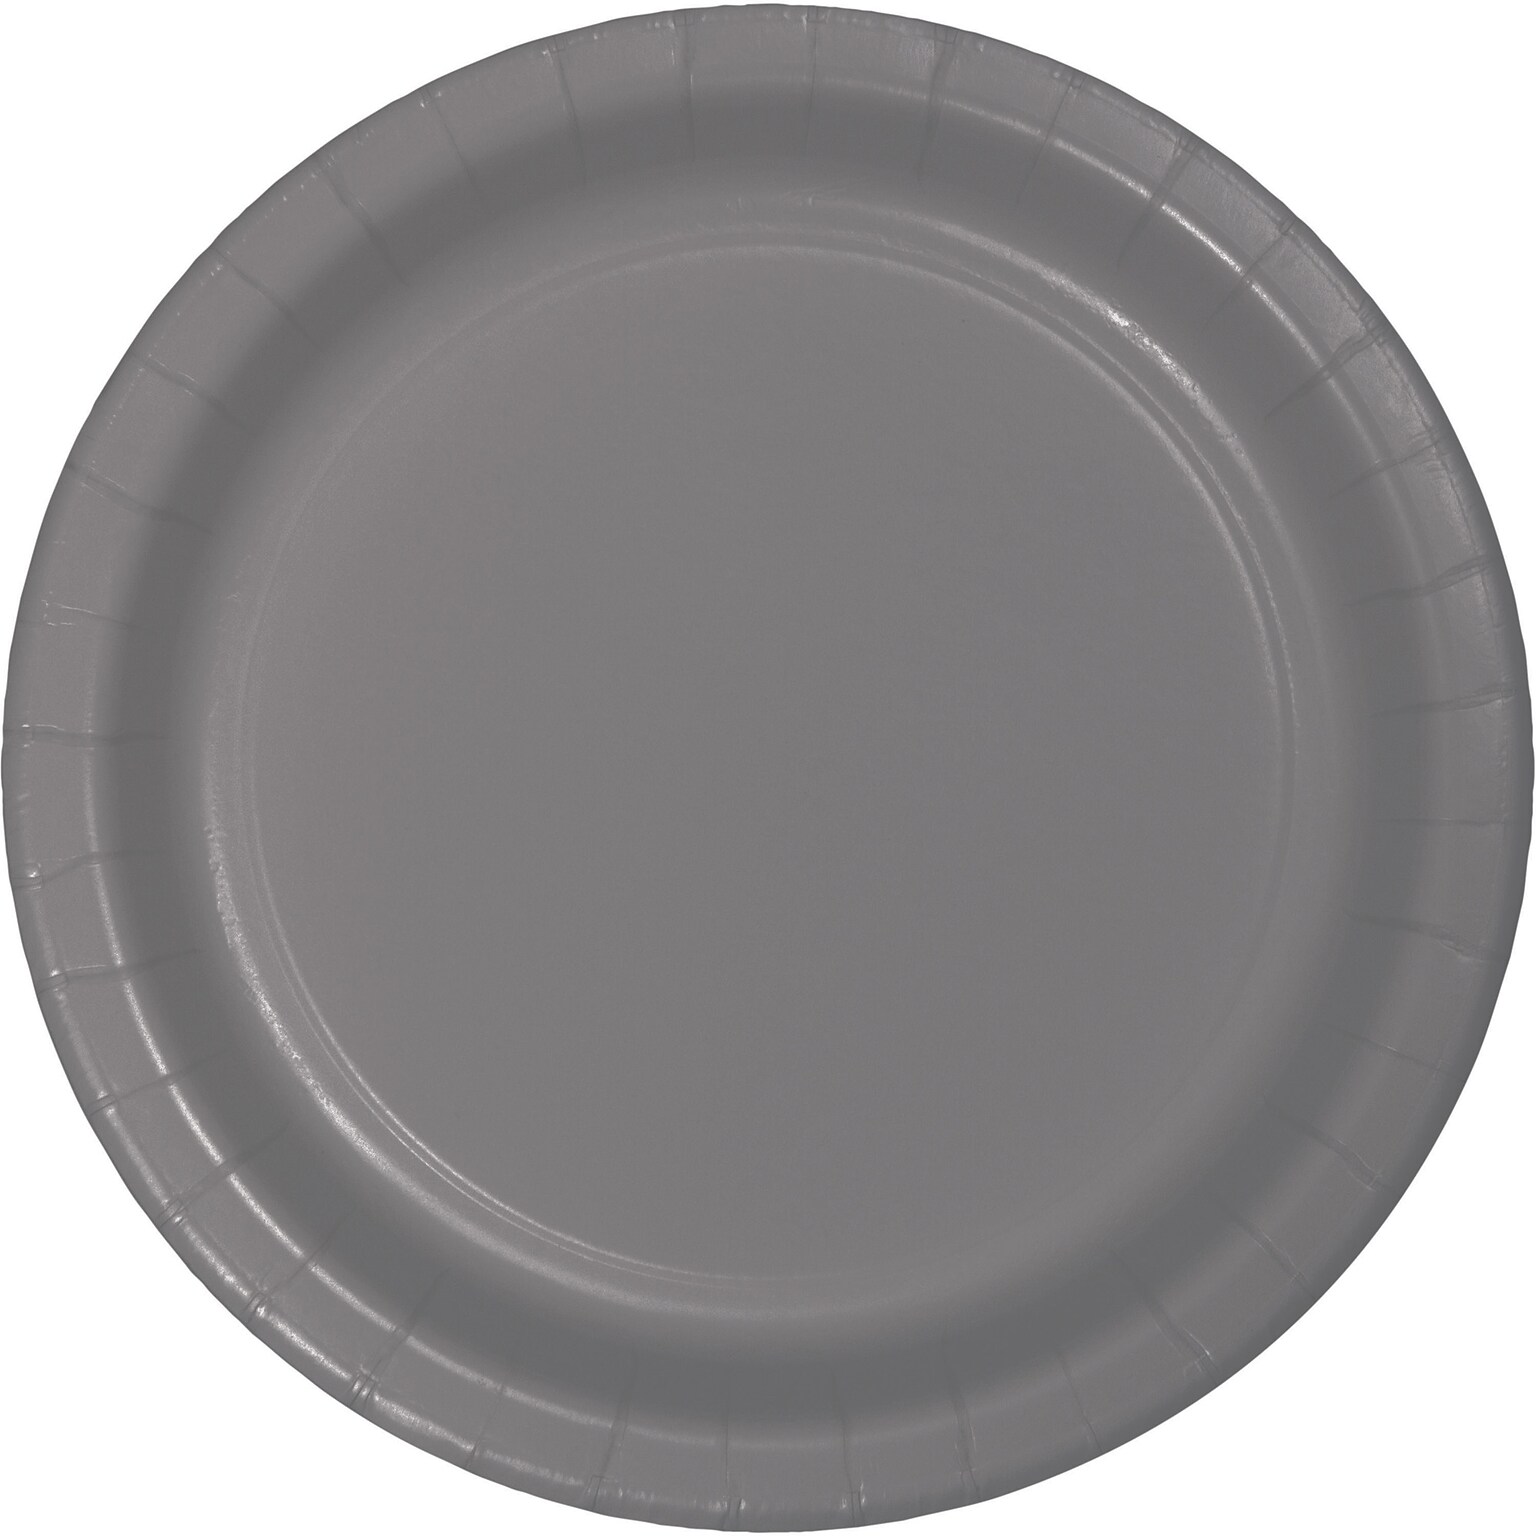 Creative Converting Glamour Gray Paper Plates, 72 Count (DTC339639DPLT)